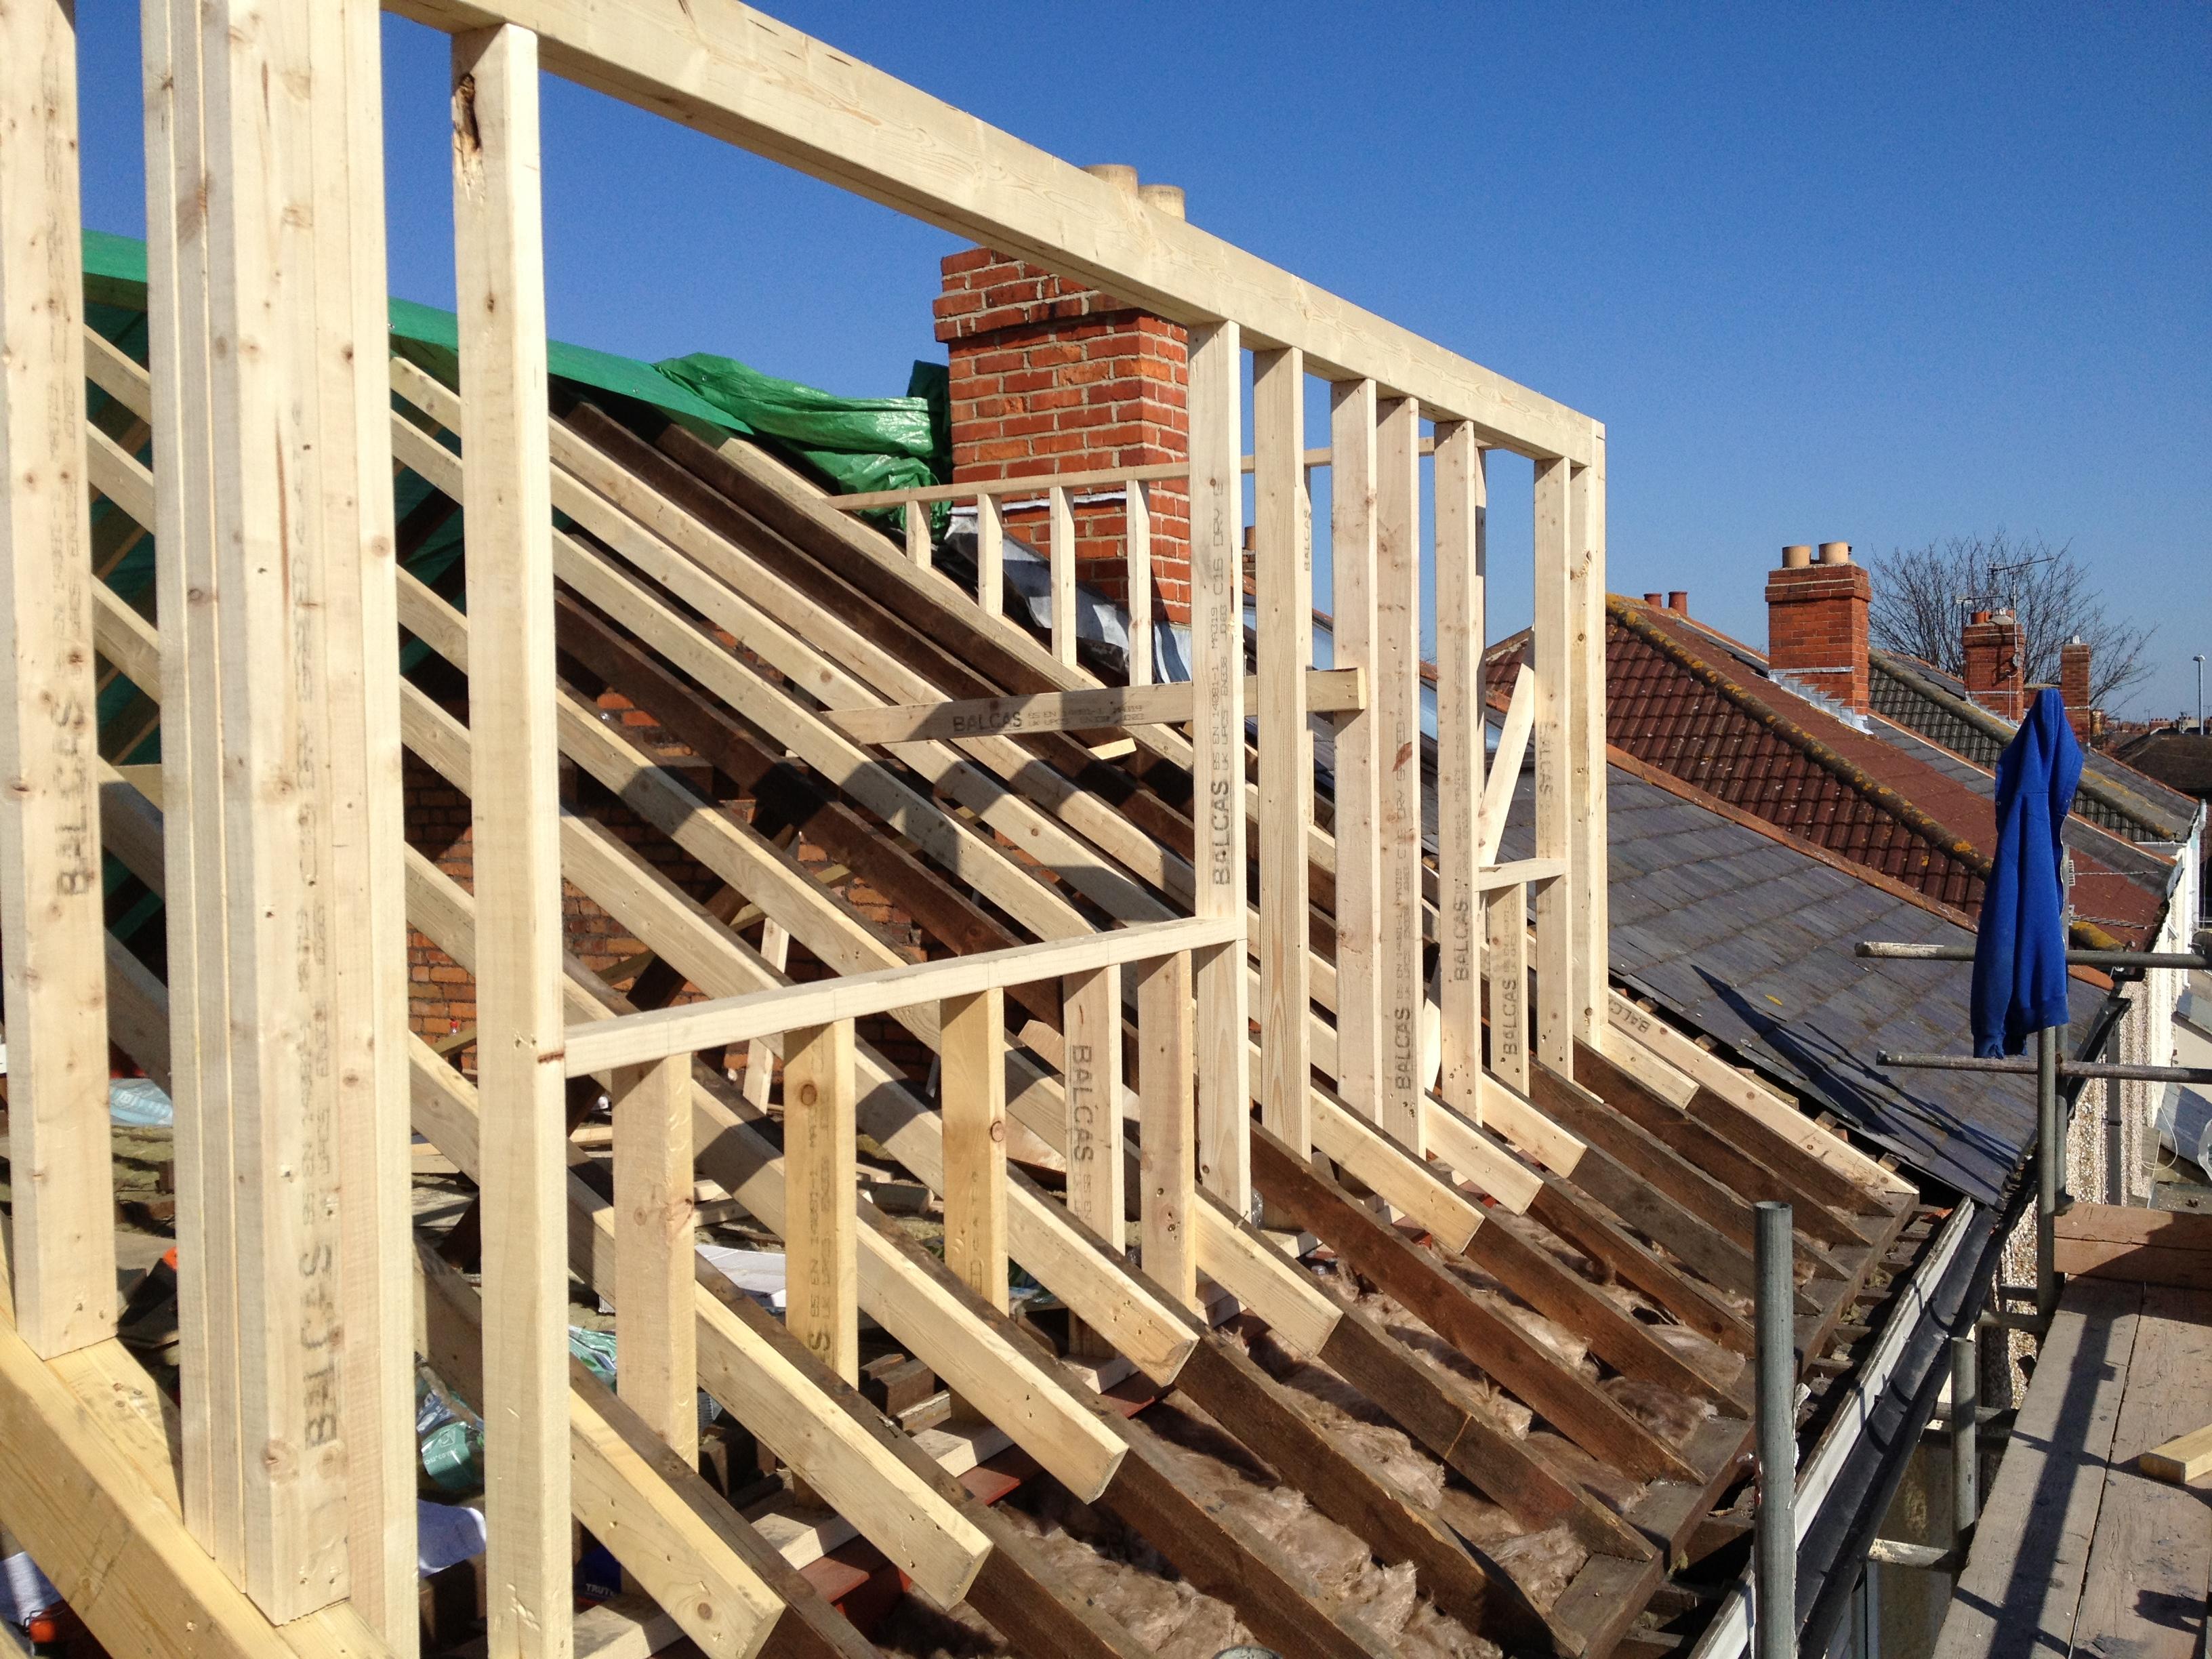 To buy a house with old uncertified loft conversion?